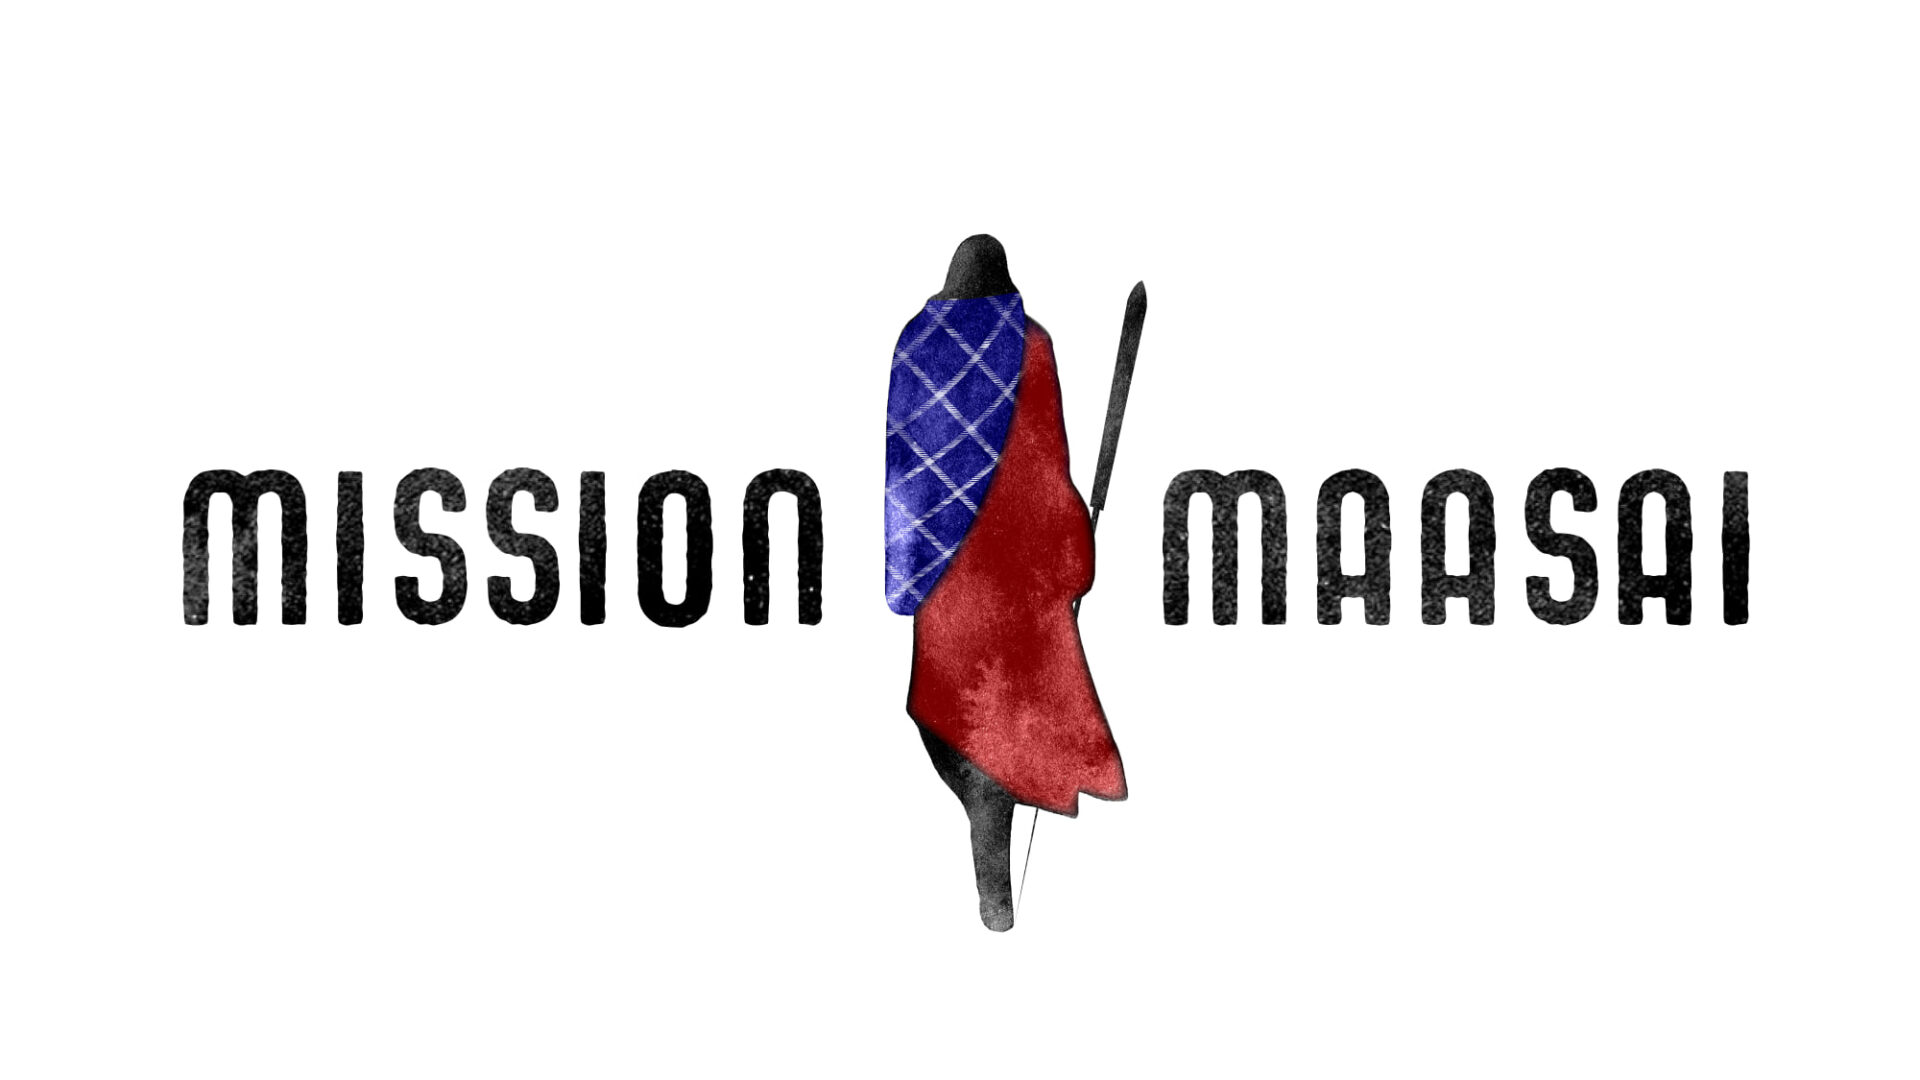 Mission Maasai logo with image of person walking